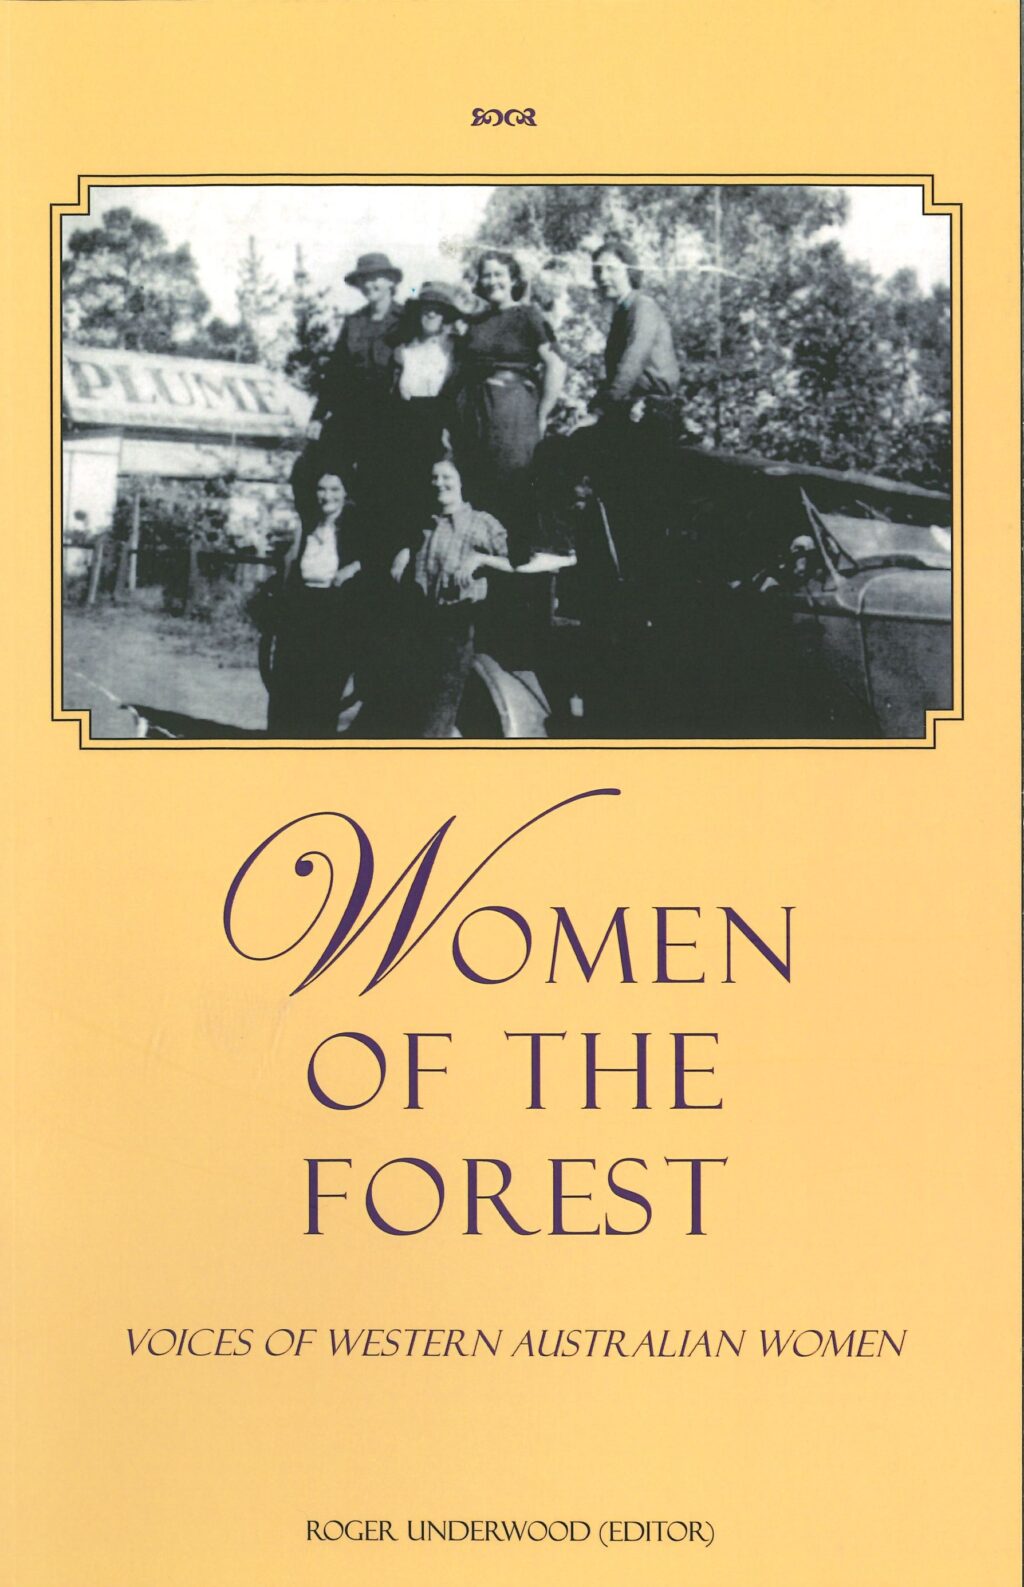 Women of the Forest, Voices of Western Australian Women